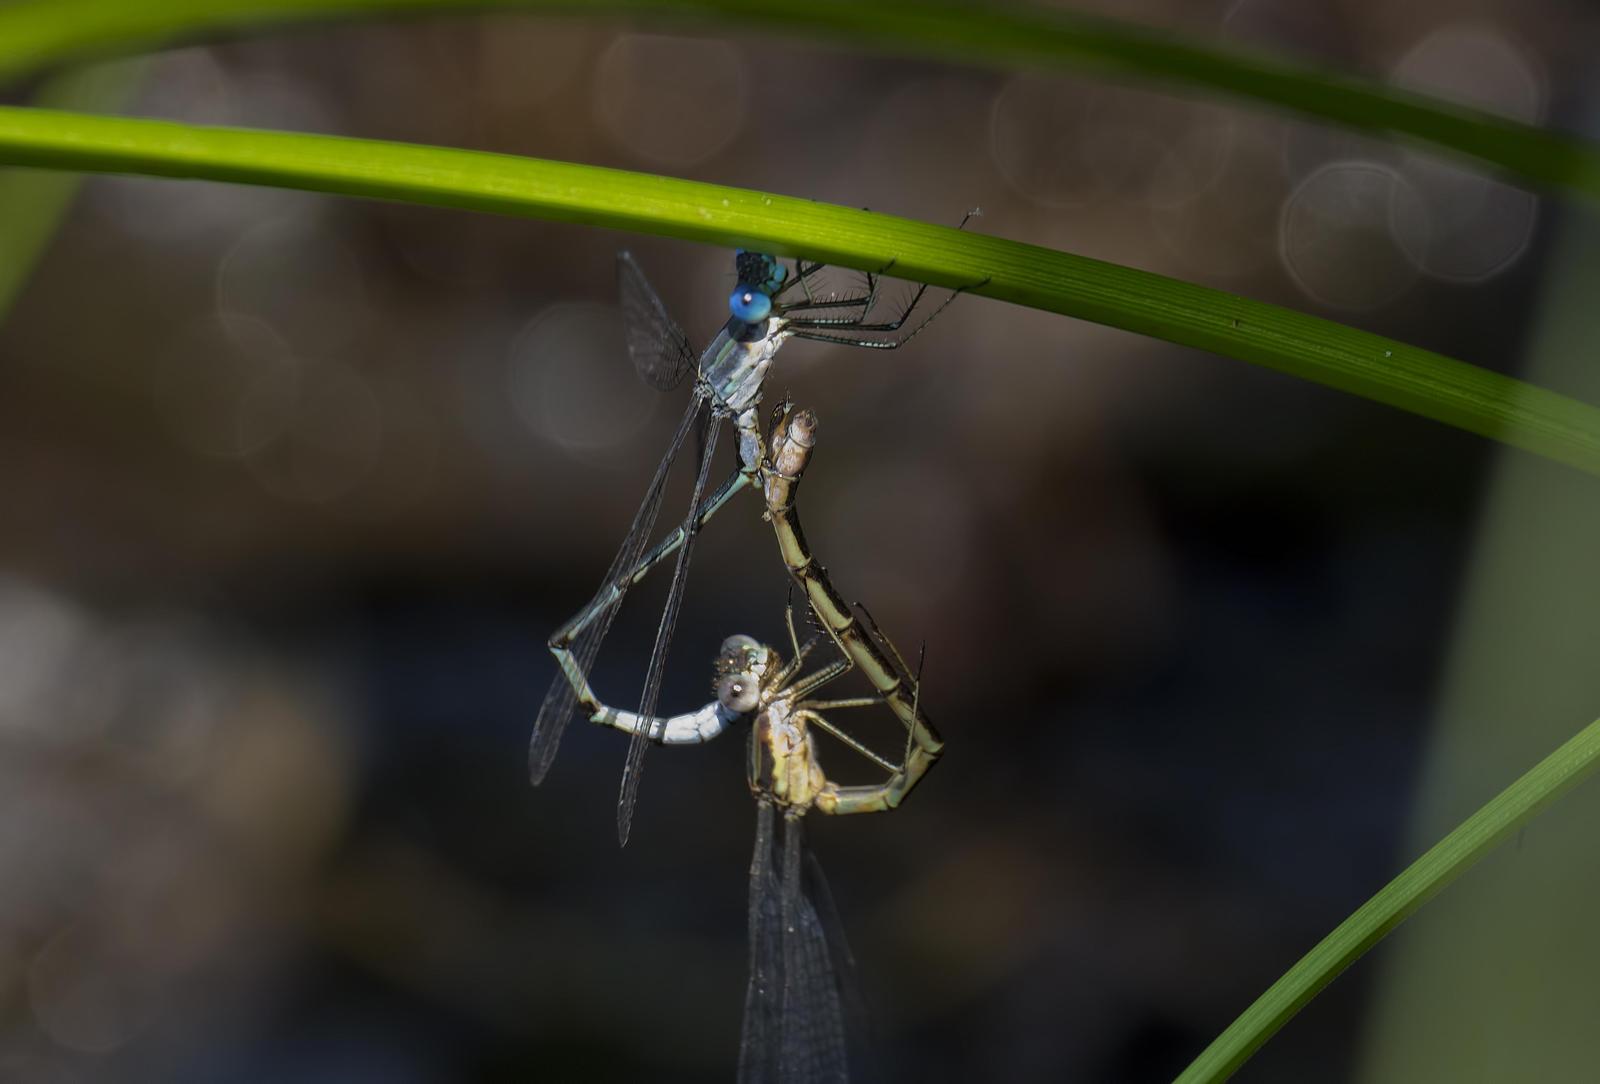 Sweetflag Spreadwing Photo by Michael Moore